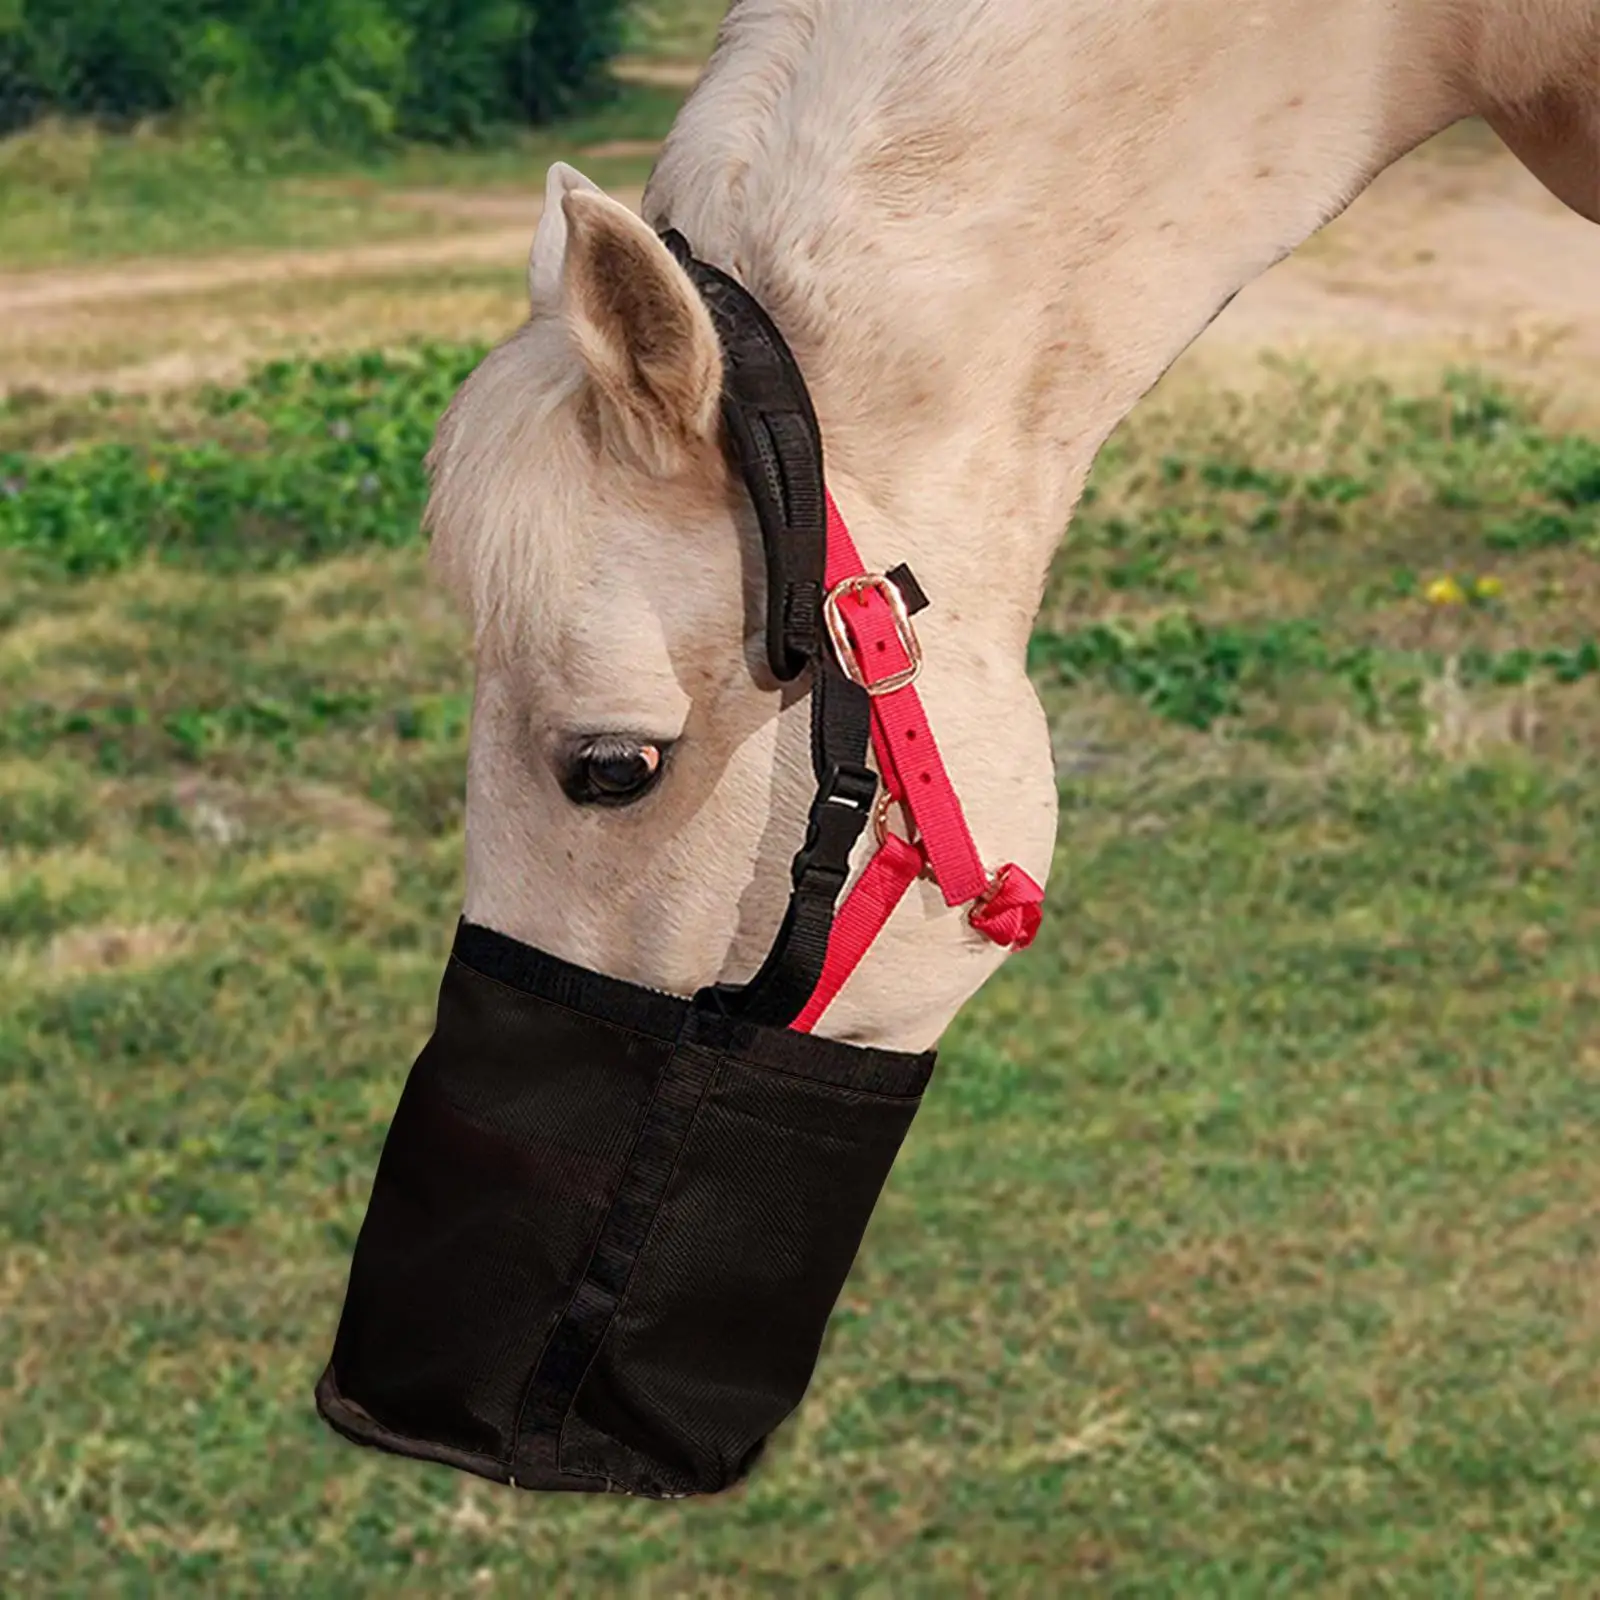 Feeder Bag Slow feed Tote Portable Horse Hay Bag for Cattle Farm Herbivores